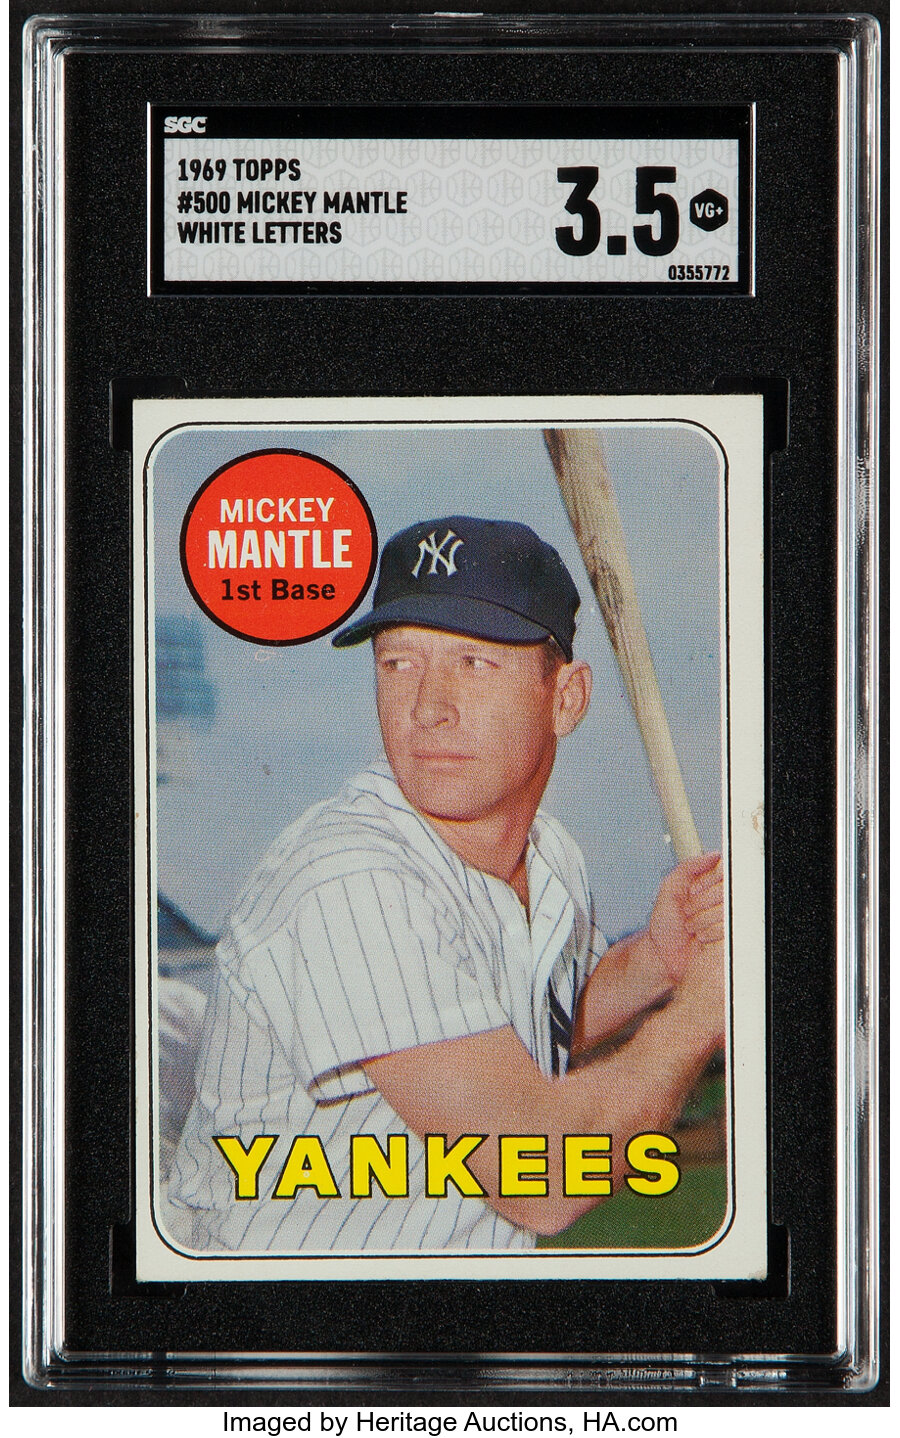 1969 Topps Mickey Mantle (White Letters) #500 SGC VG+ 3.5